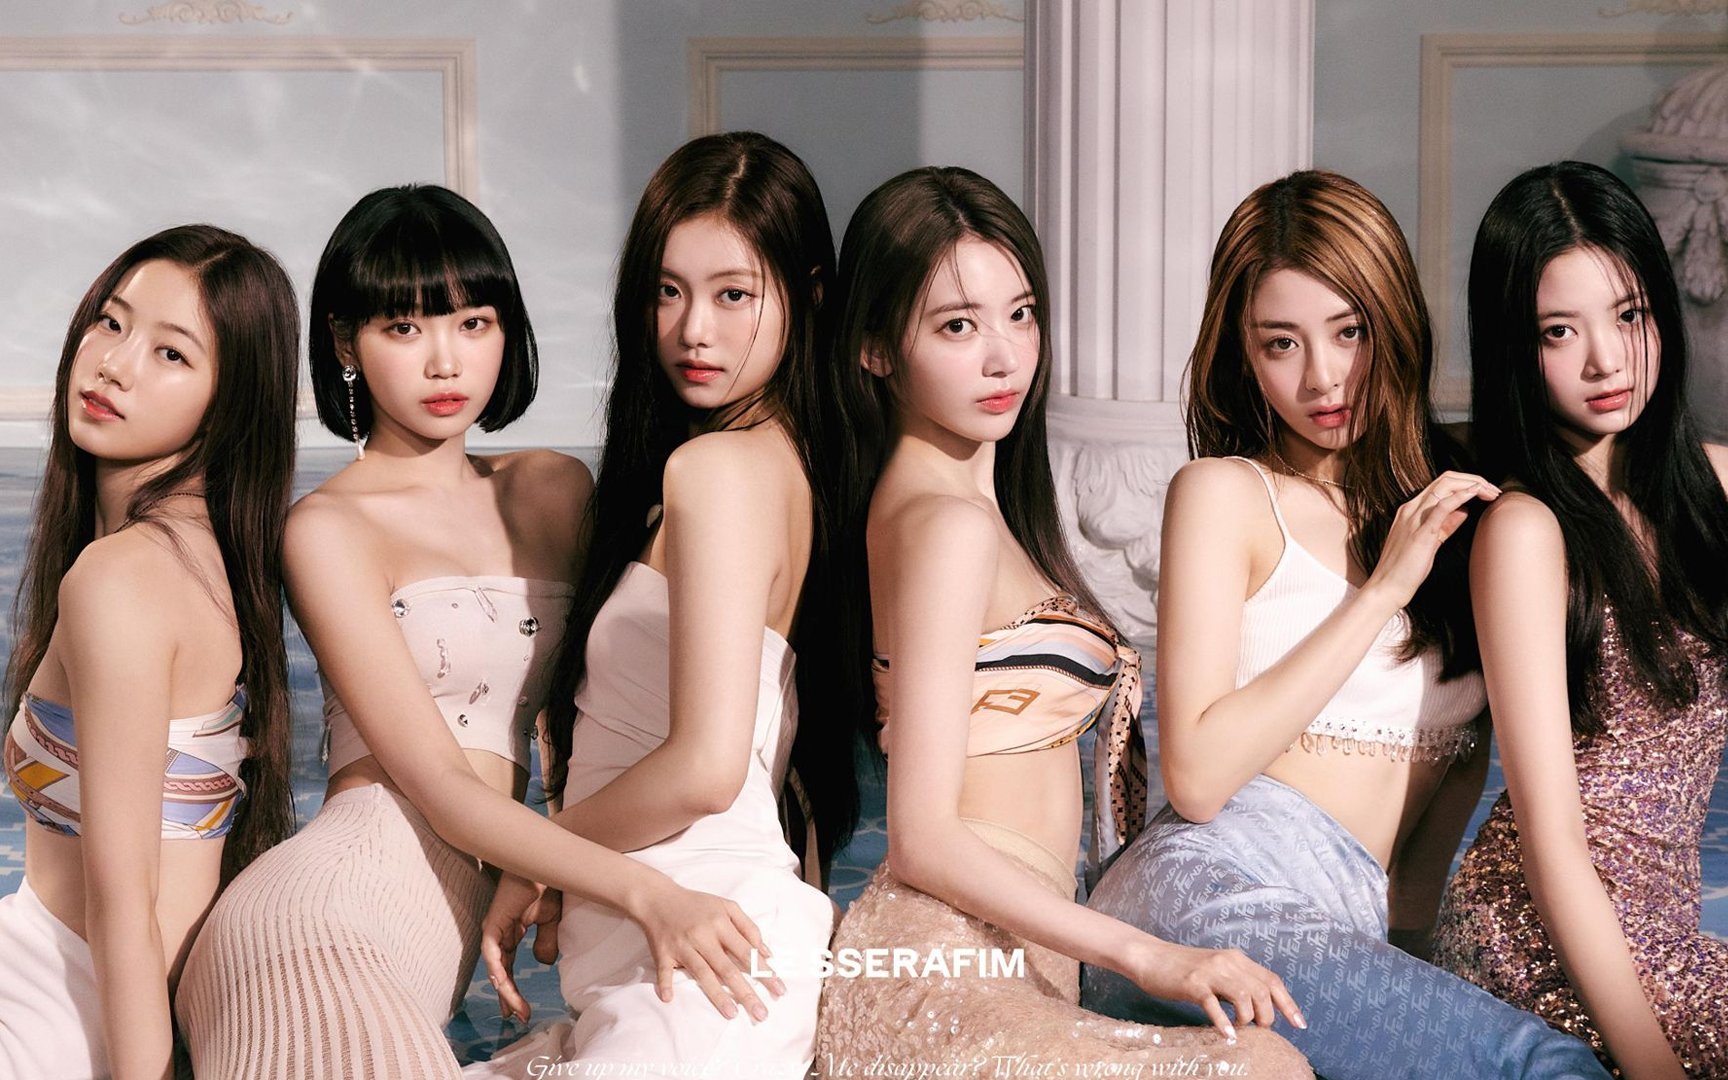 LE SSERAFIM unveils alluring teaser photo for their debut with 'FEARLESS'